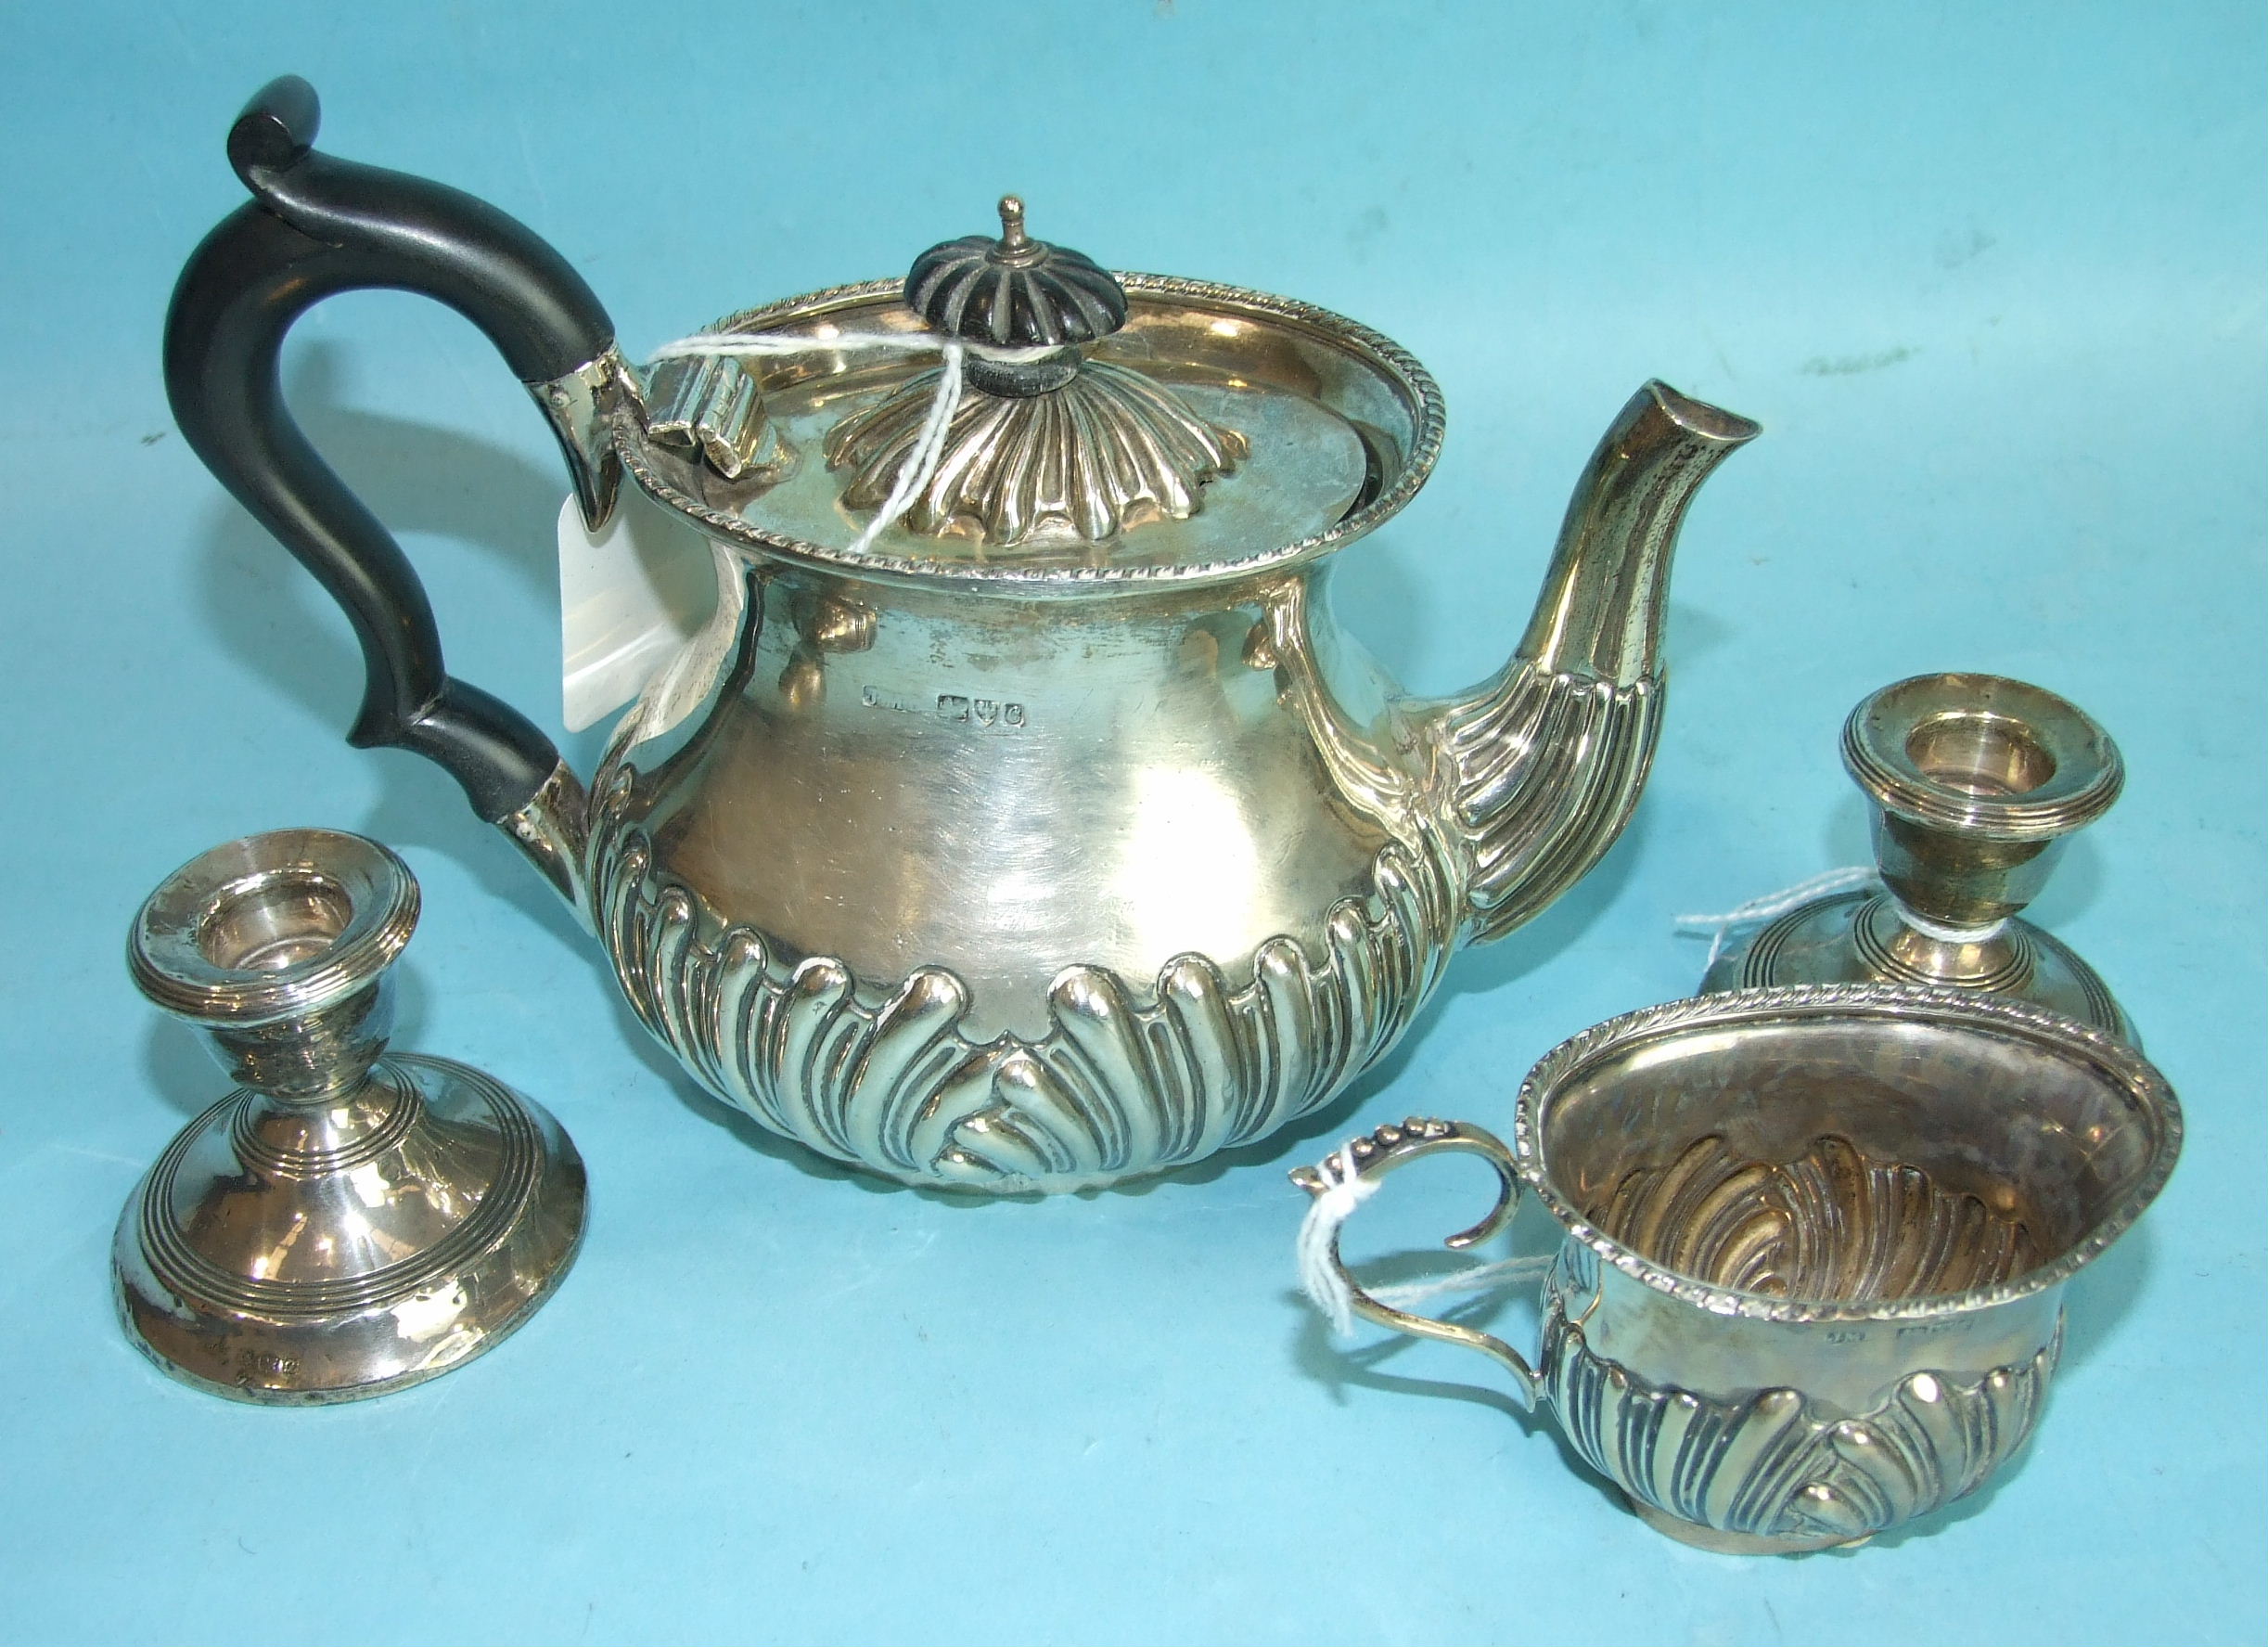 An Edwardian bachelor's half-gadrooned teapot and cream jug, Chester 1903, (inscription removed) and